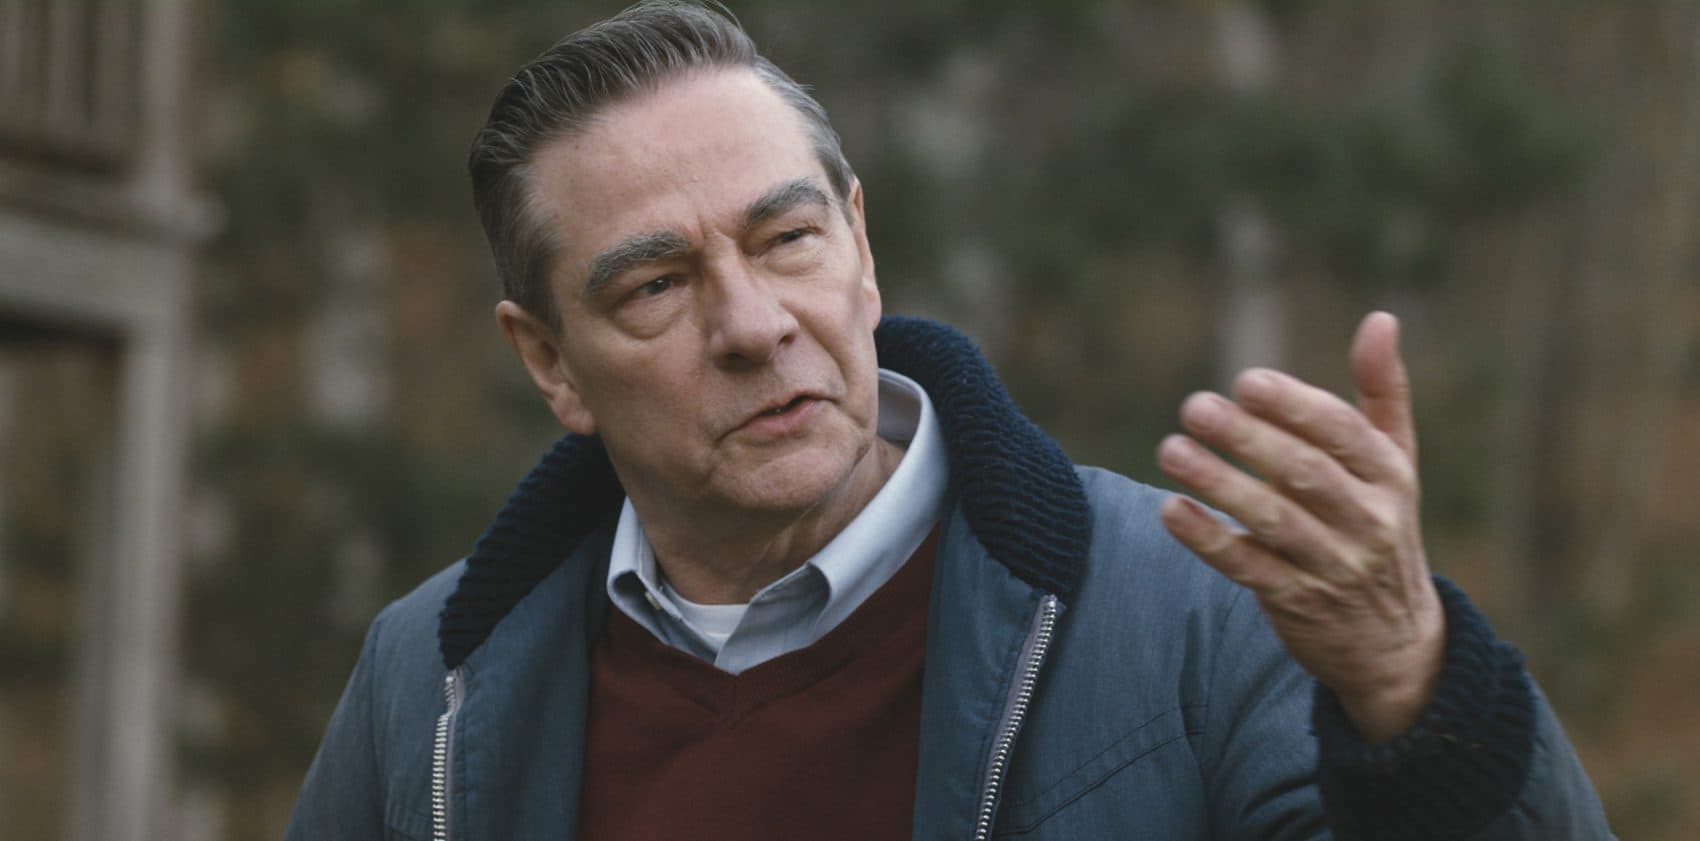 Oscar-winner and South Shore resident Chris Cooper plays J.D. Salinger in &quot;Coming Through the Rye.&quot; (Courtesy)